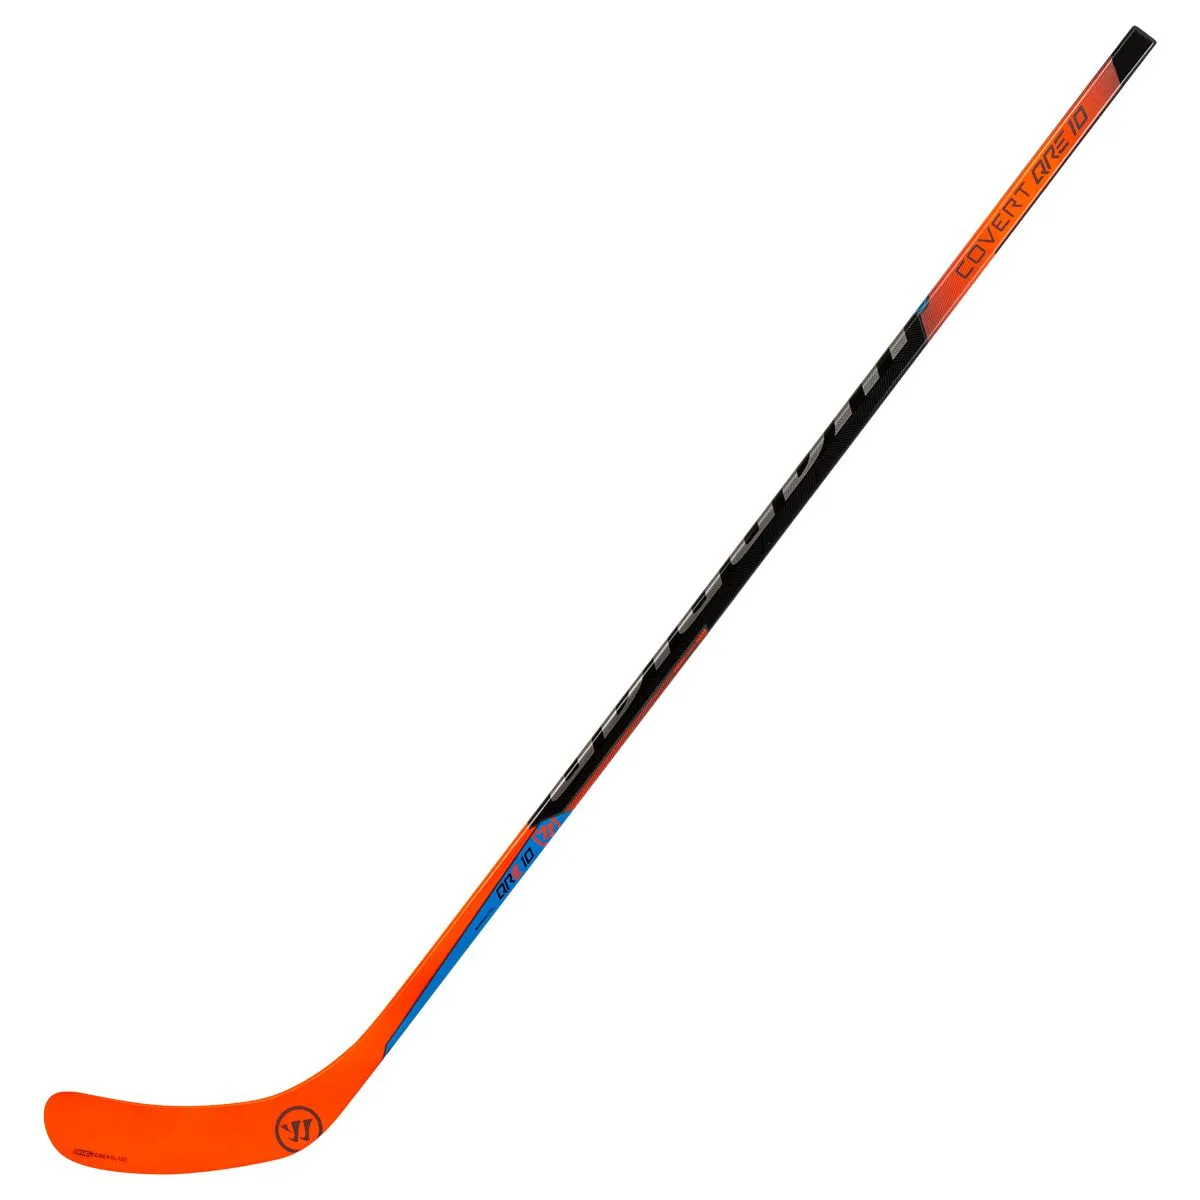 WARRIOR Covert QRE 10 Youth Composite Hockey Stick